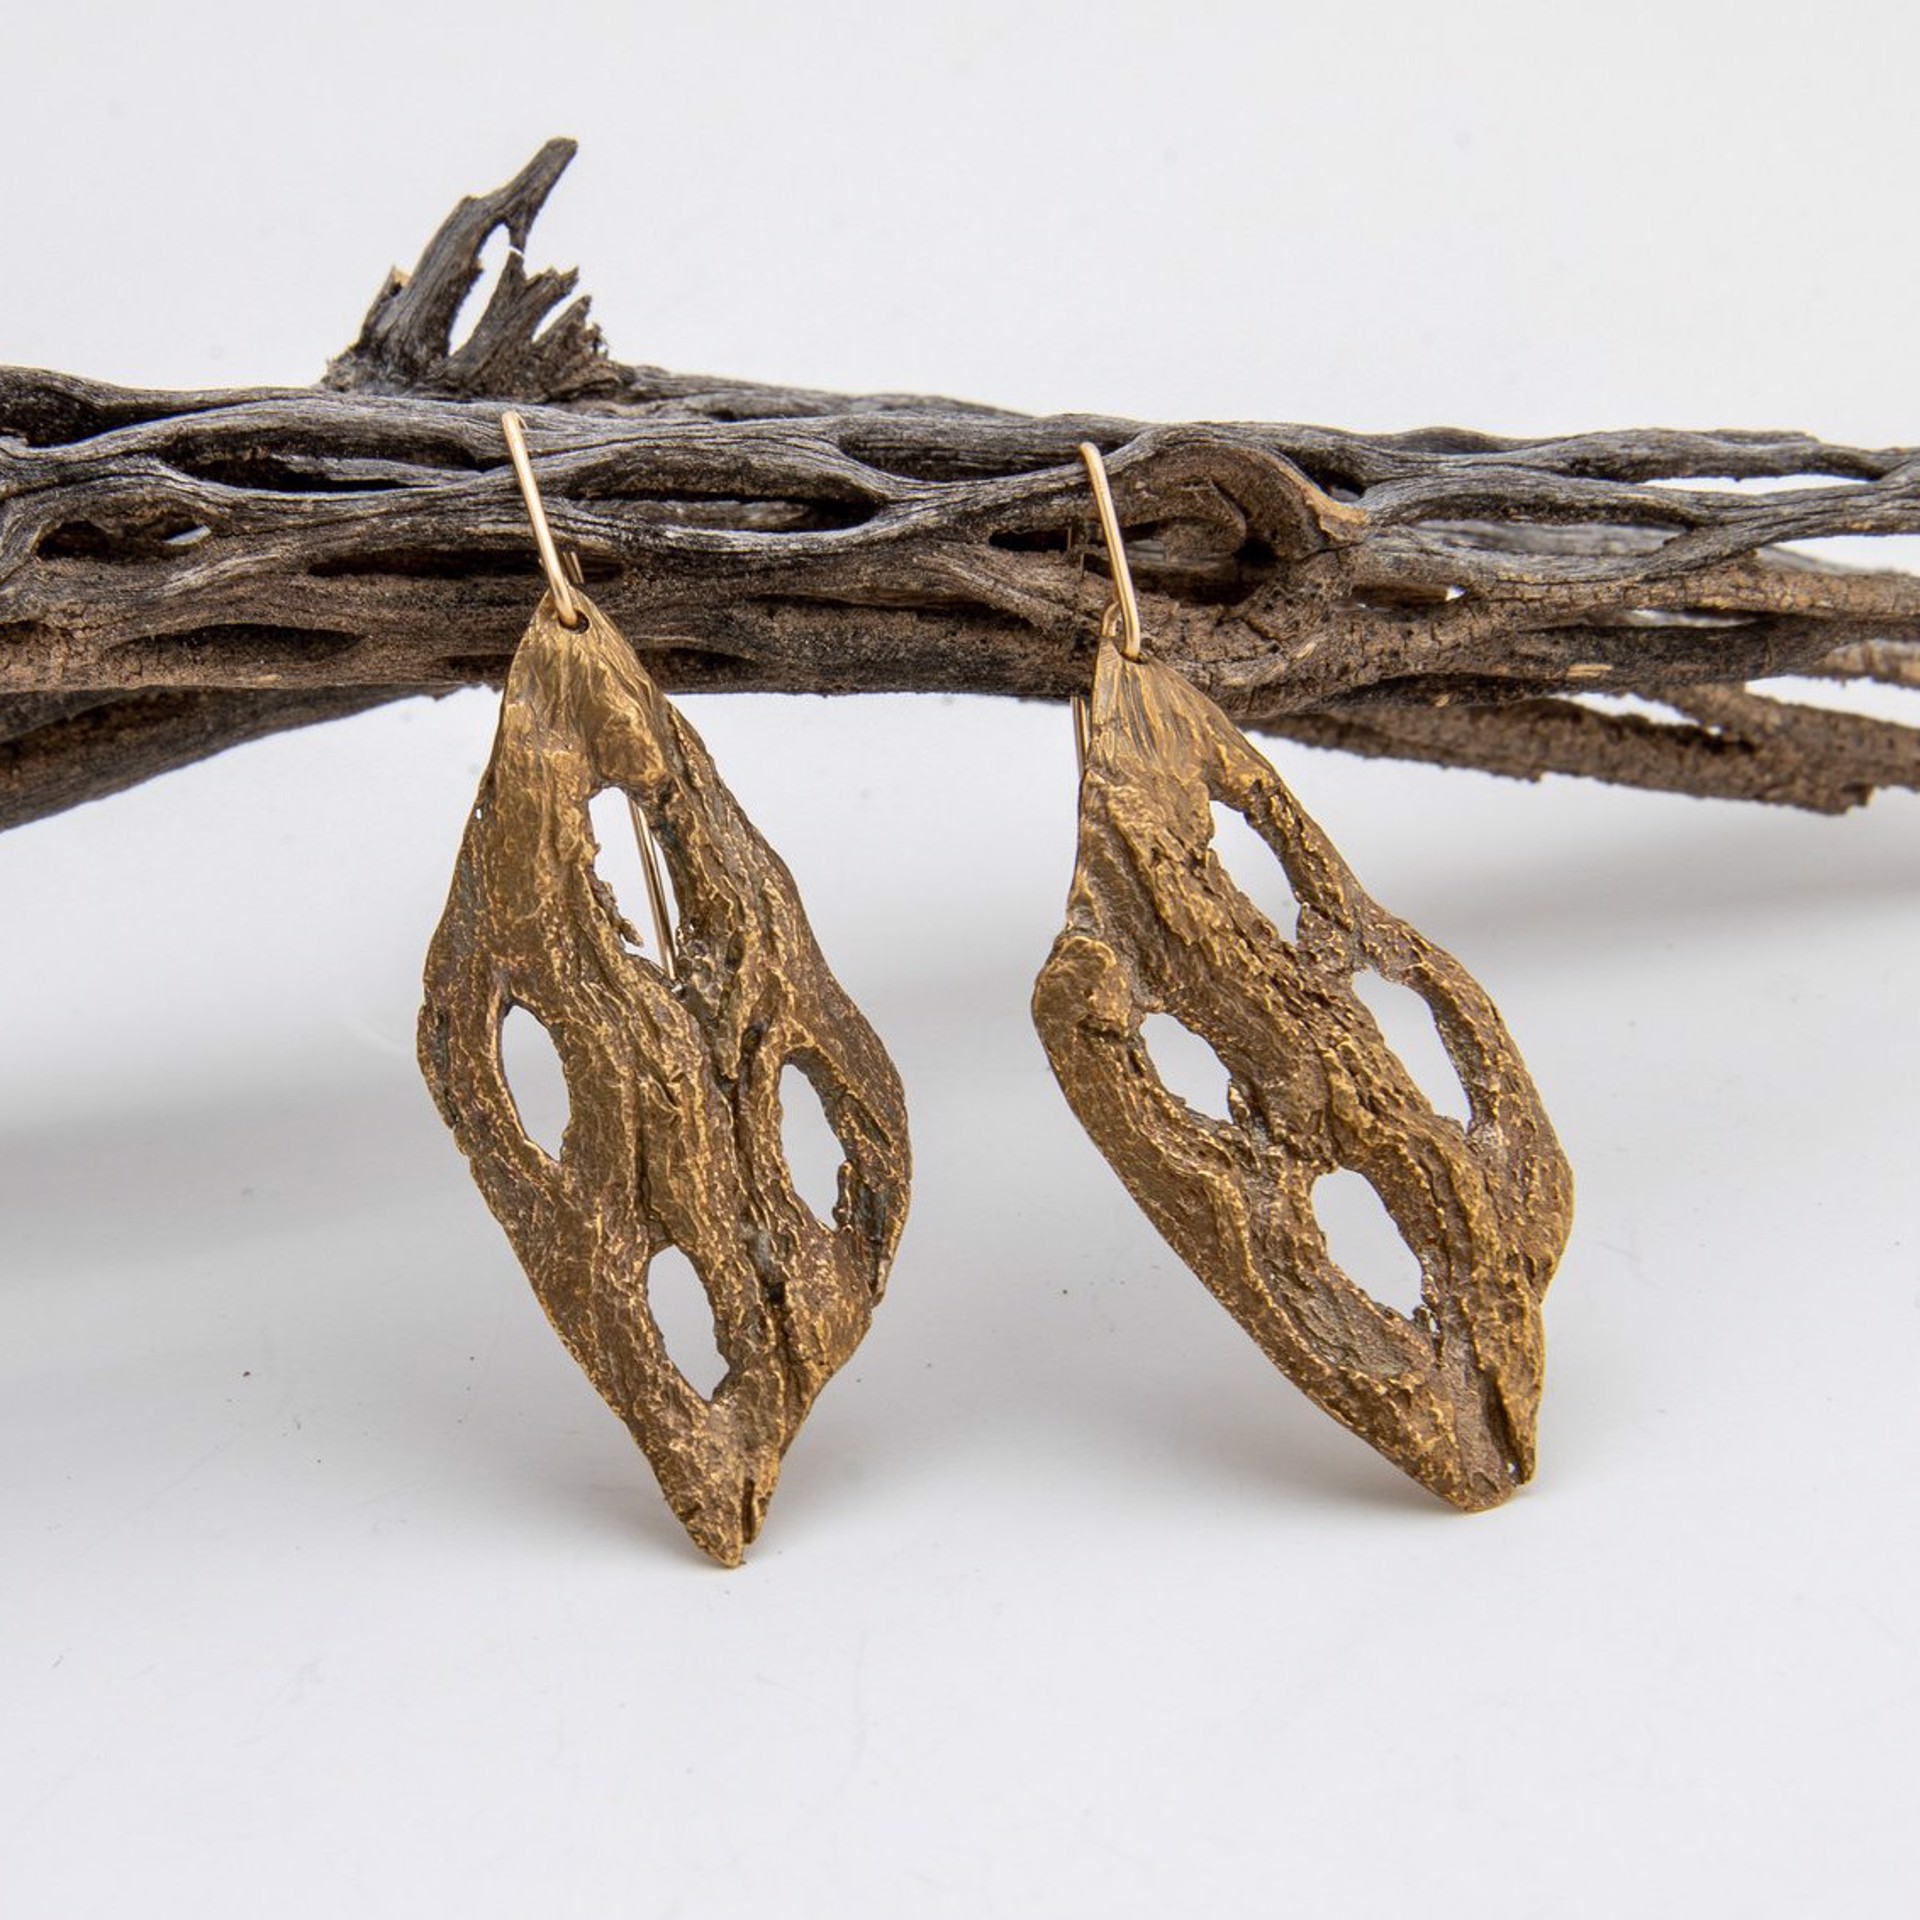 Cholla Cactus Earrings by Clementine & Co. Jewelry